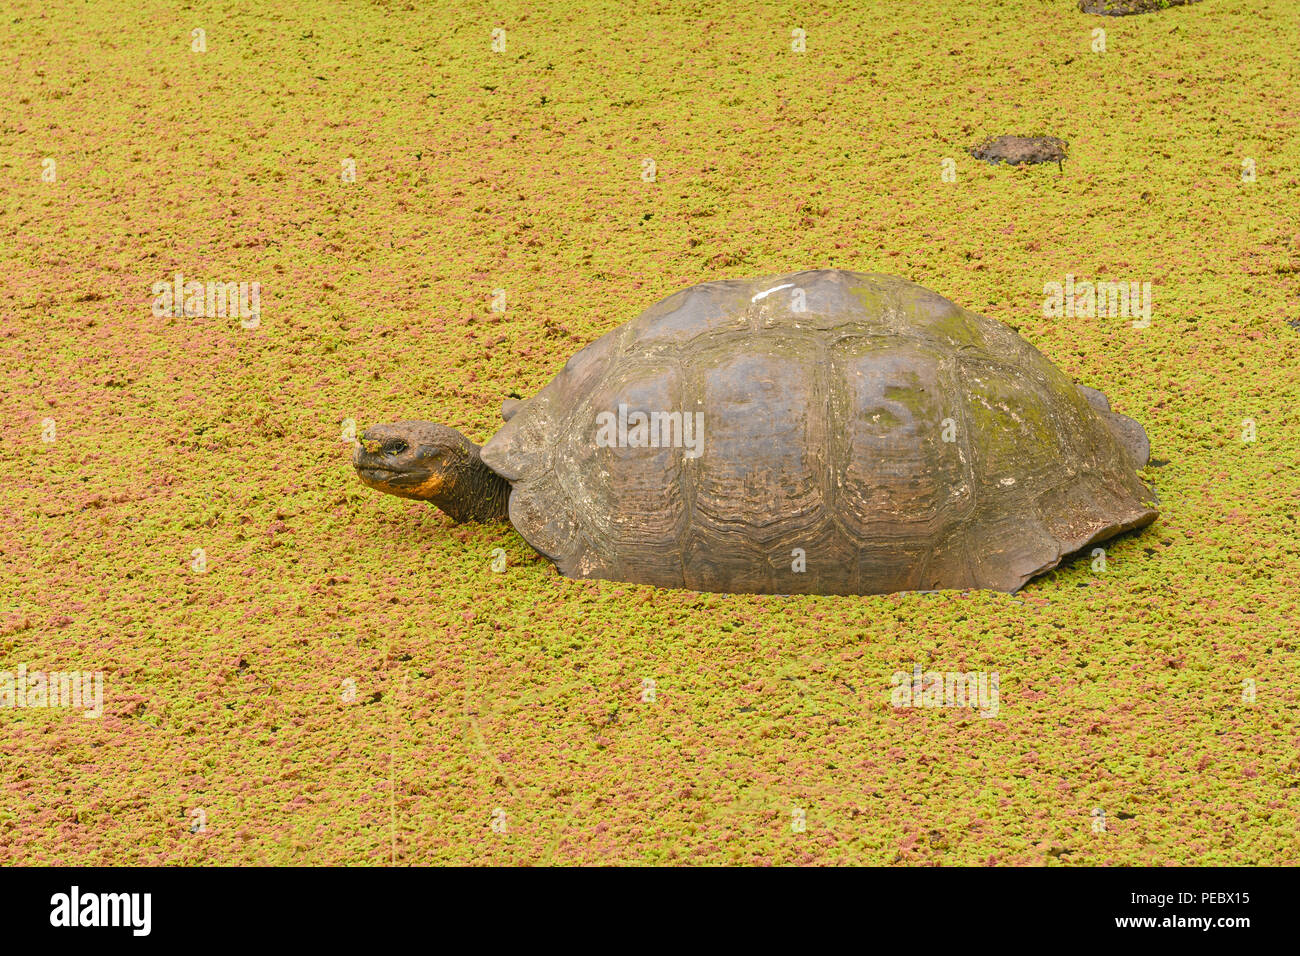 Galapagos Tortoise in a Shallow Pond that is covered in pond weed on Santa Cruz Island in the Galapagos Stock Photo